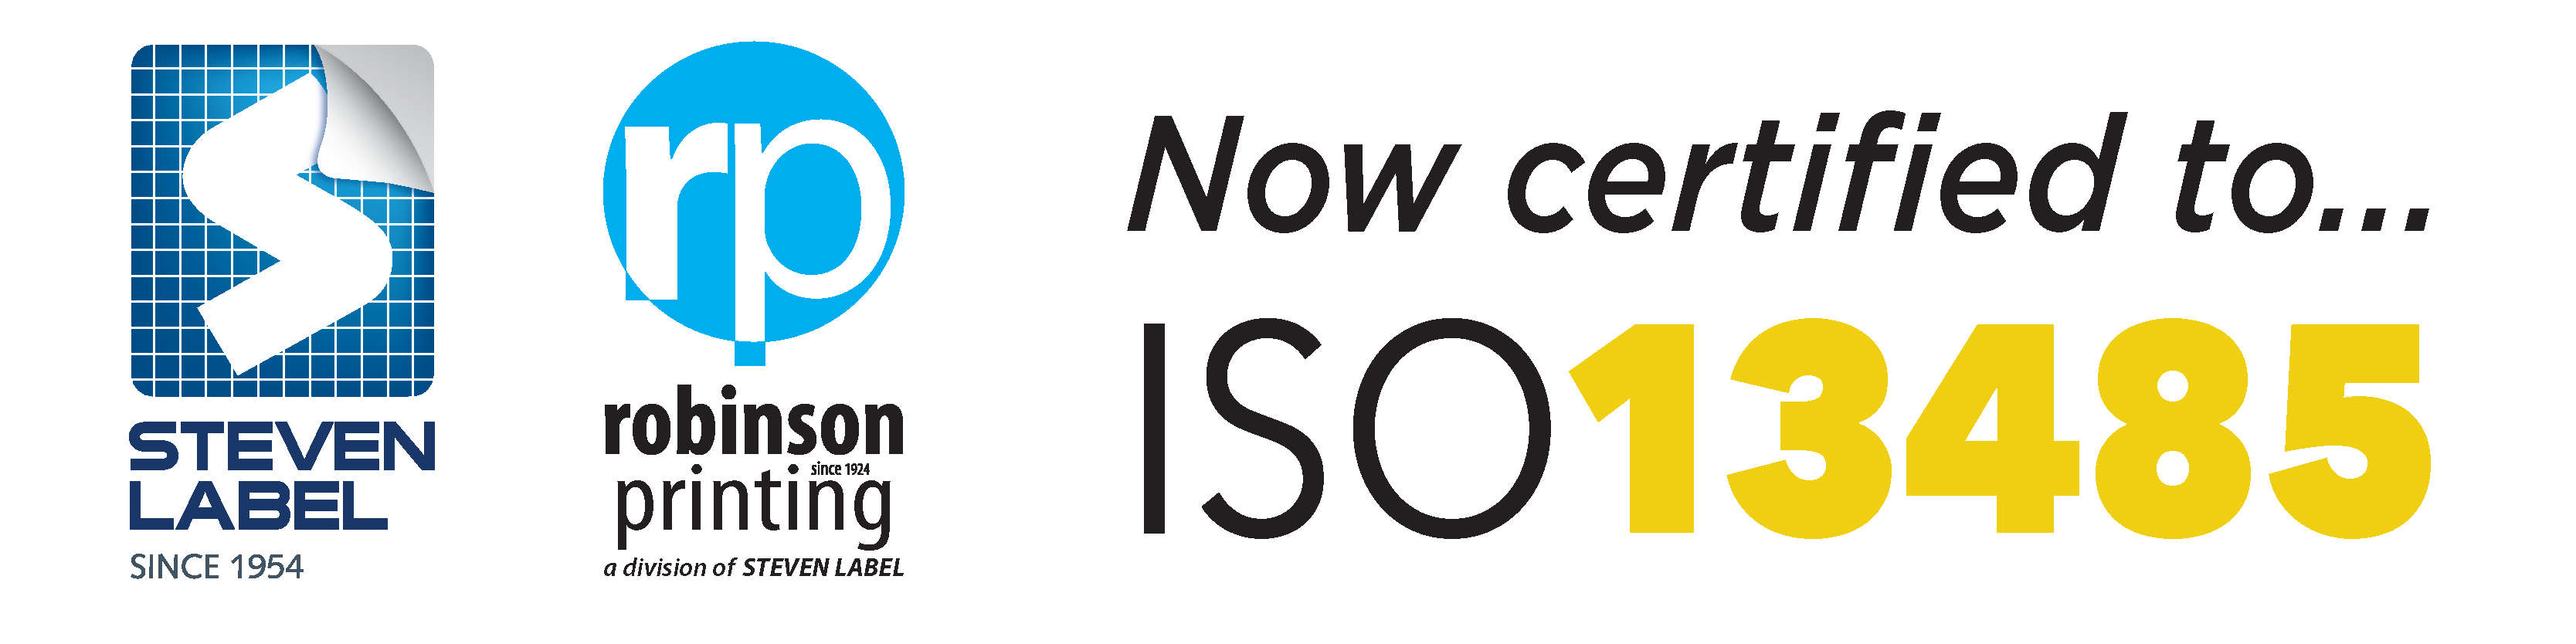 We Are Pleased to Announce We are Now Certified to ISO13485!